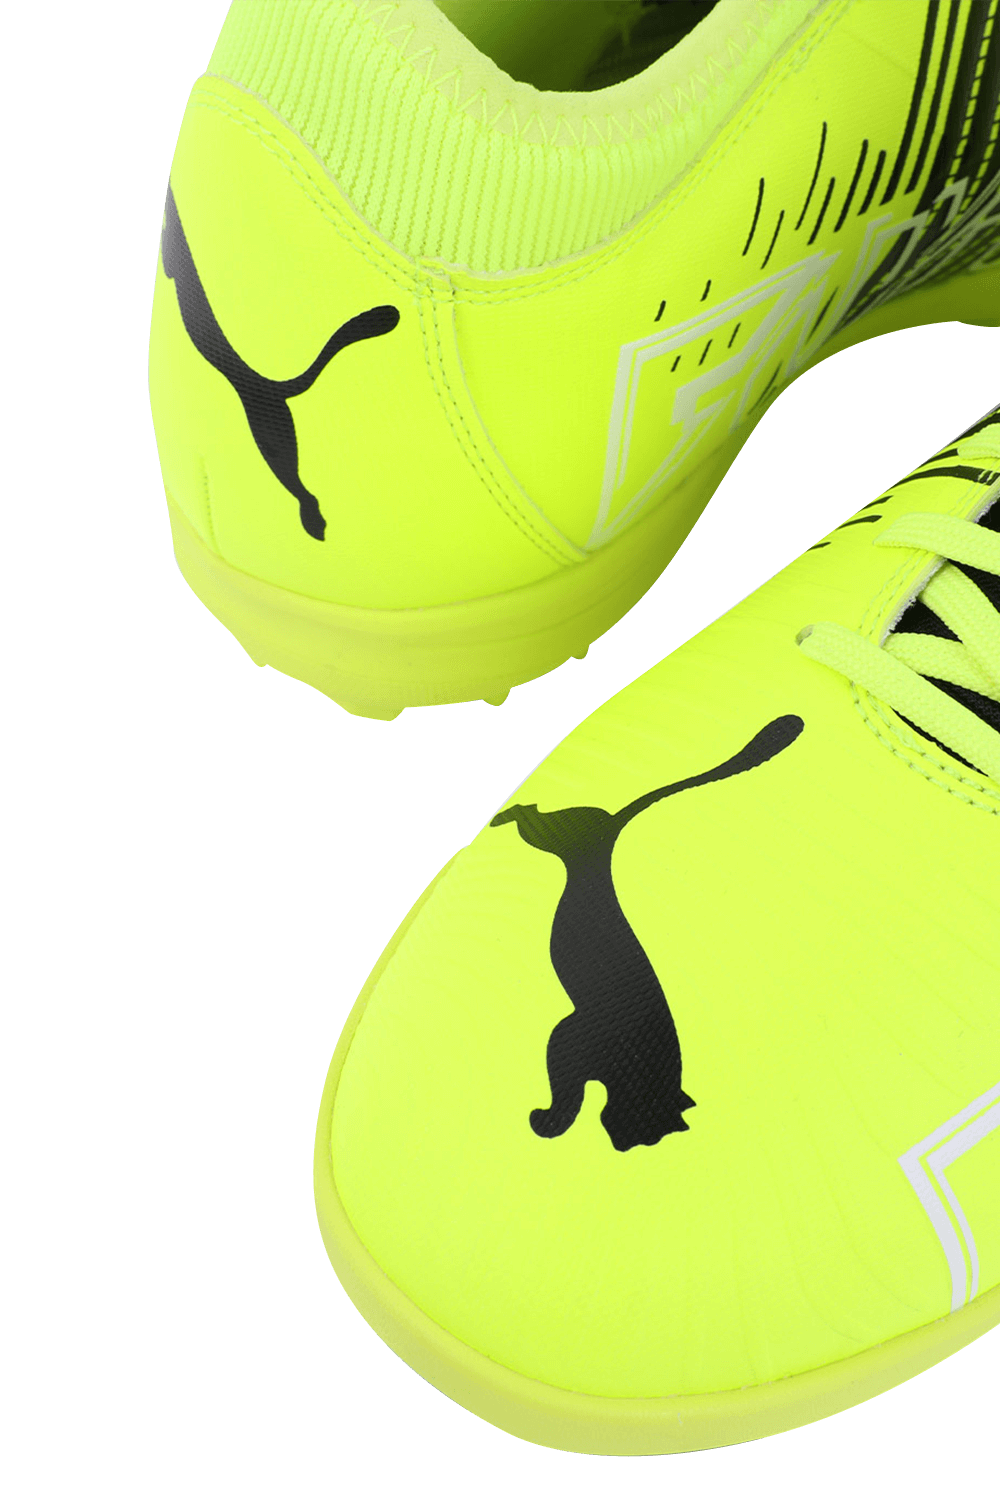 Future Z 4.1 Football Boots in Yellow PUMA